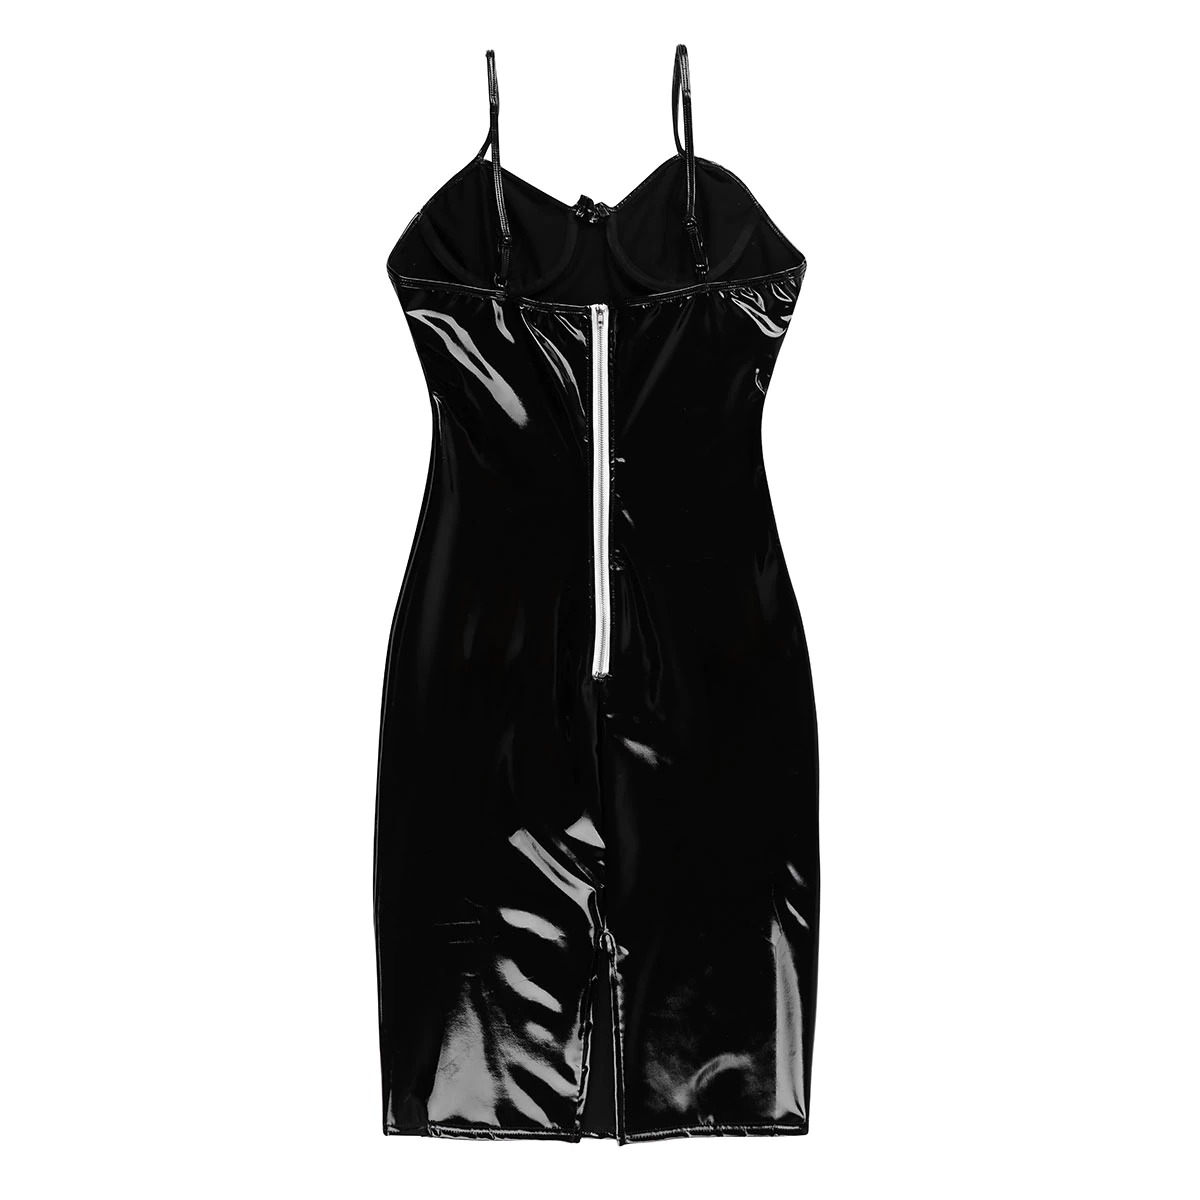 Adjustable Spaghetti Shoulder Straps Party Bodycon Dress / Wetlook Faux Leather Dress with G-String - EVE's SECRETS